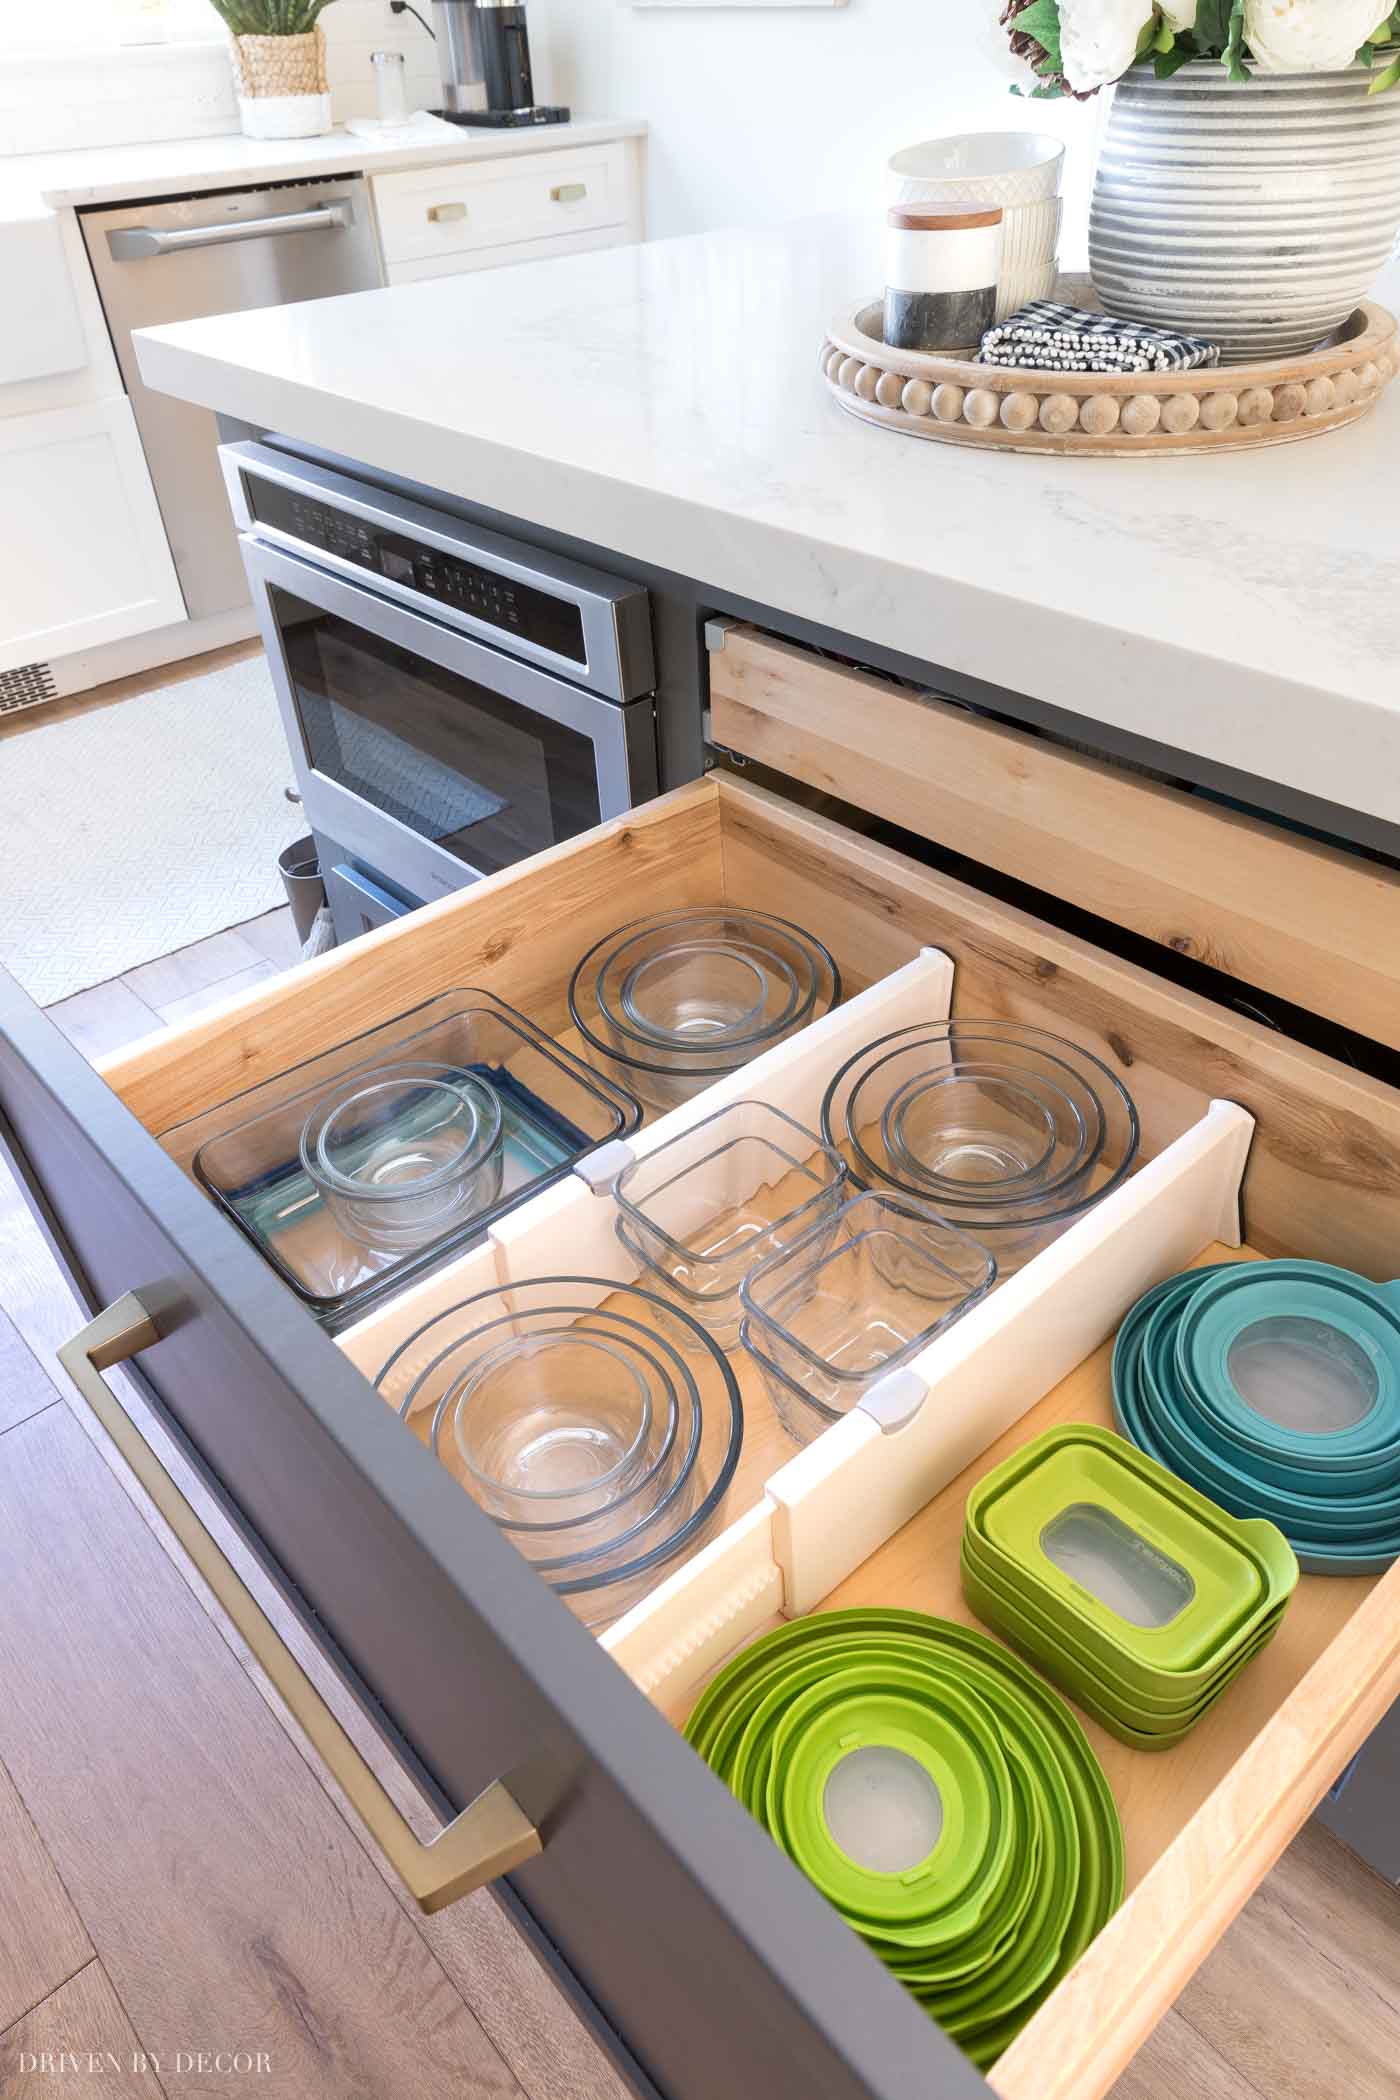 Such a great way to organize food storage containers! Love all of the ideas in this kitchen organization post!